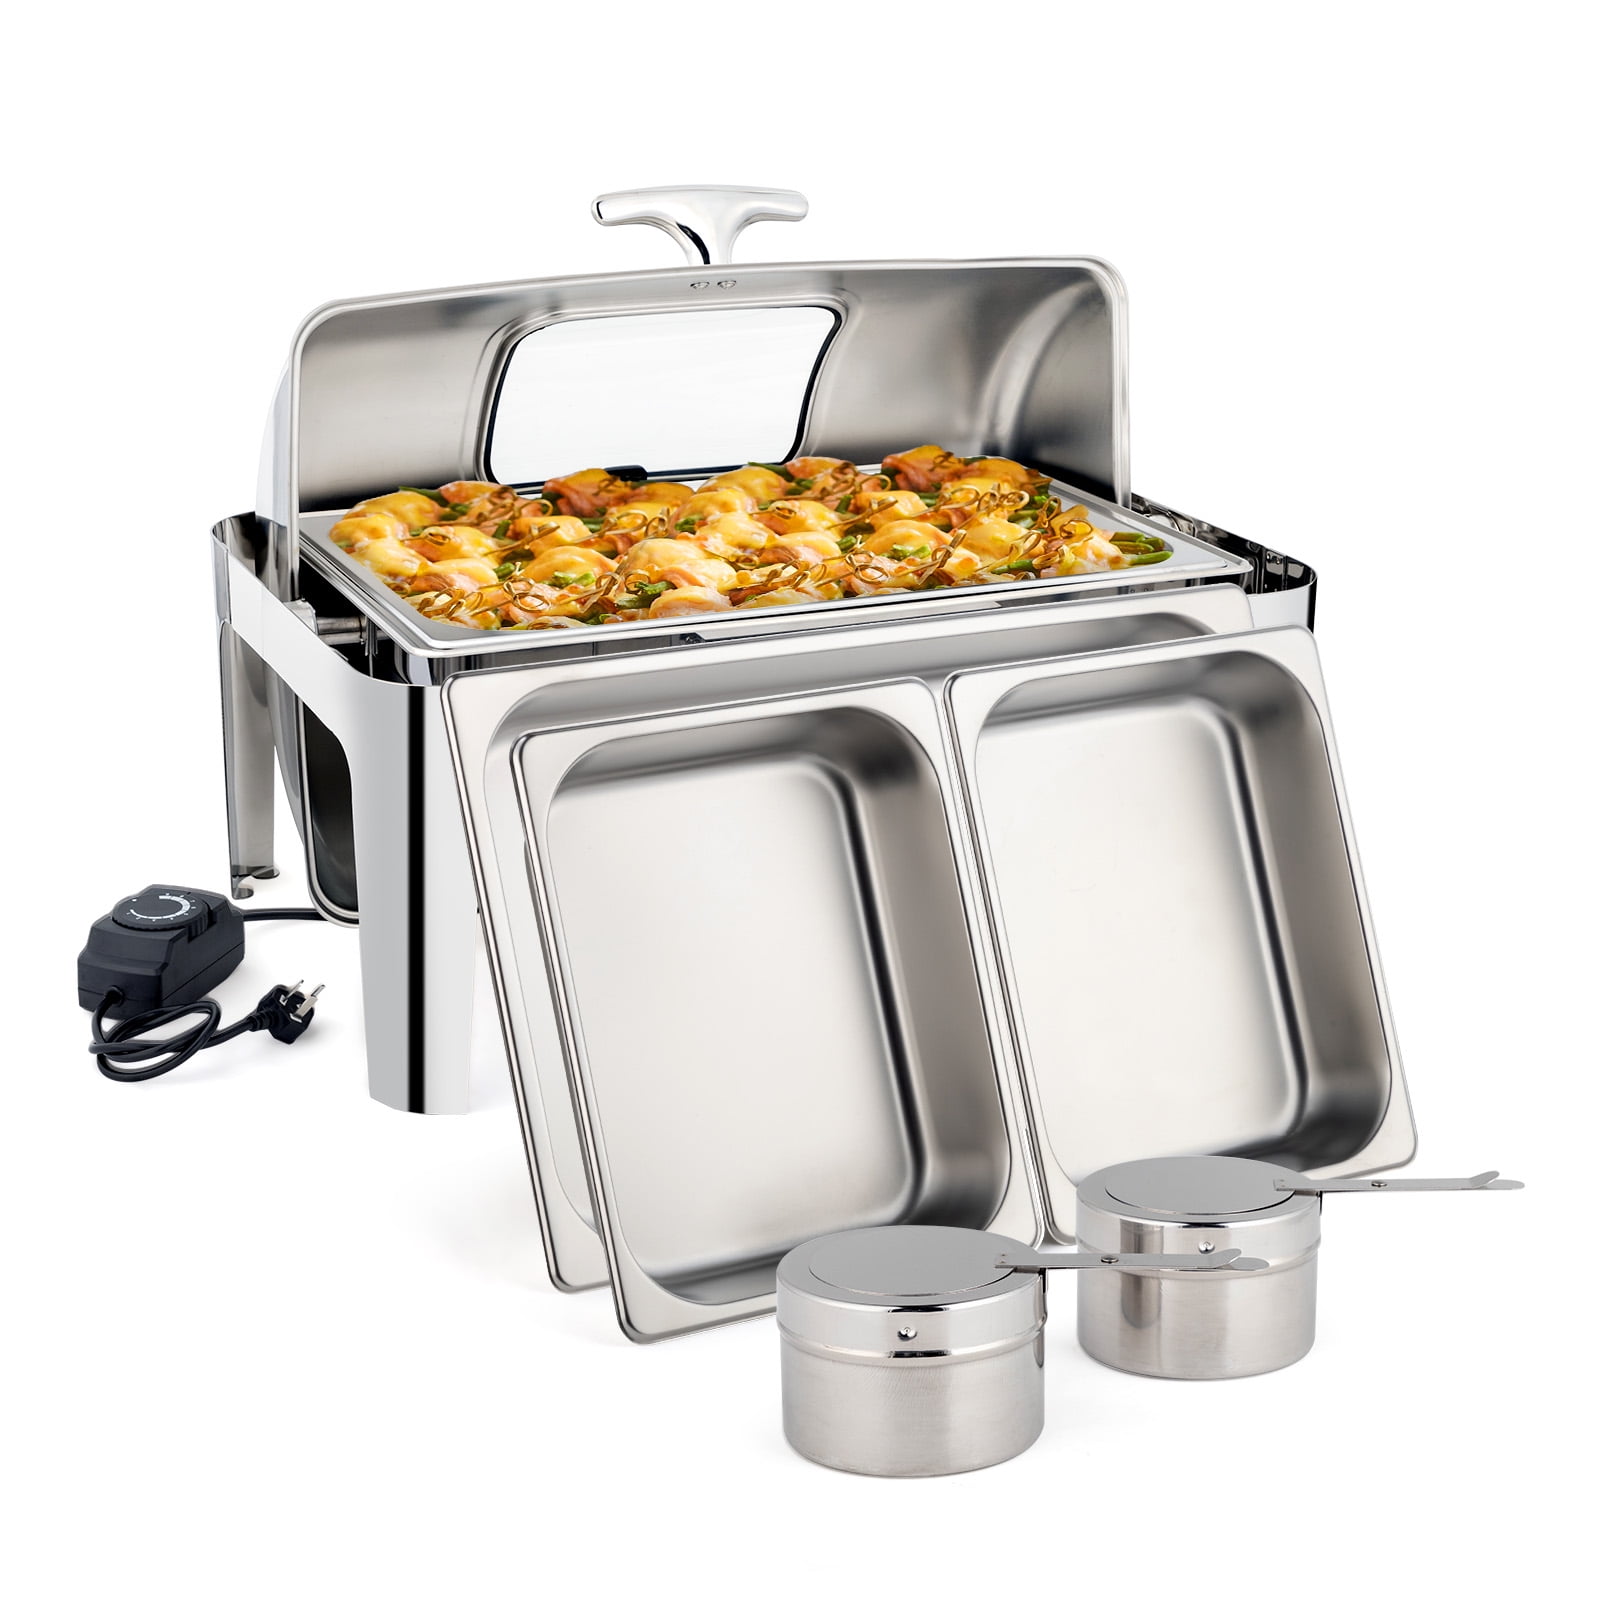 Amhier 9 Qt Chafing Dish Buffet Set with Visible Roll Top, Stainless Steel  Buffet Servers and Warmers for Catering, Parties, Hotels and Weddings, 3